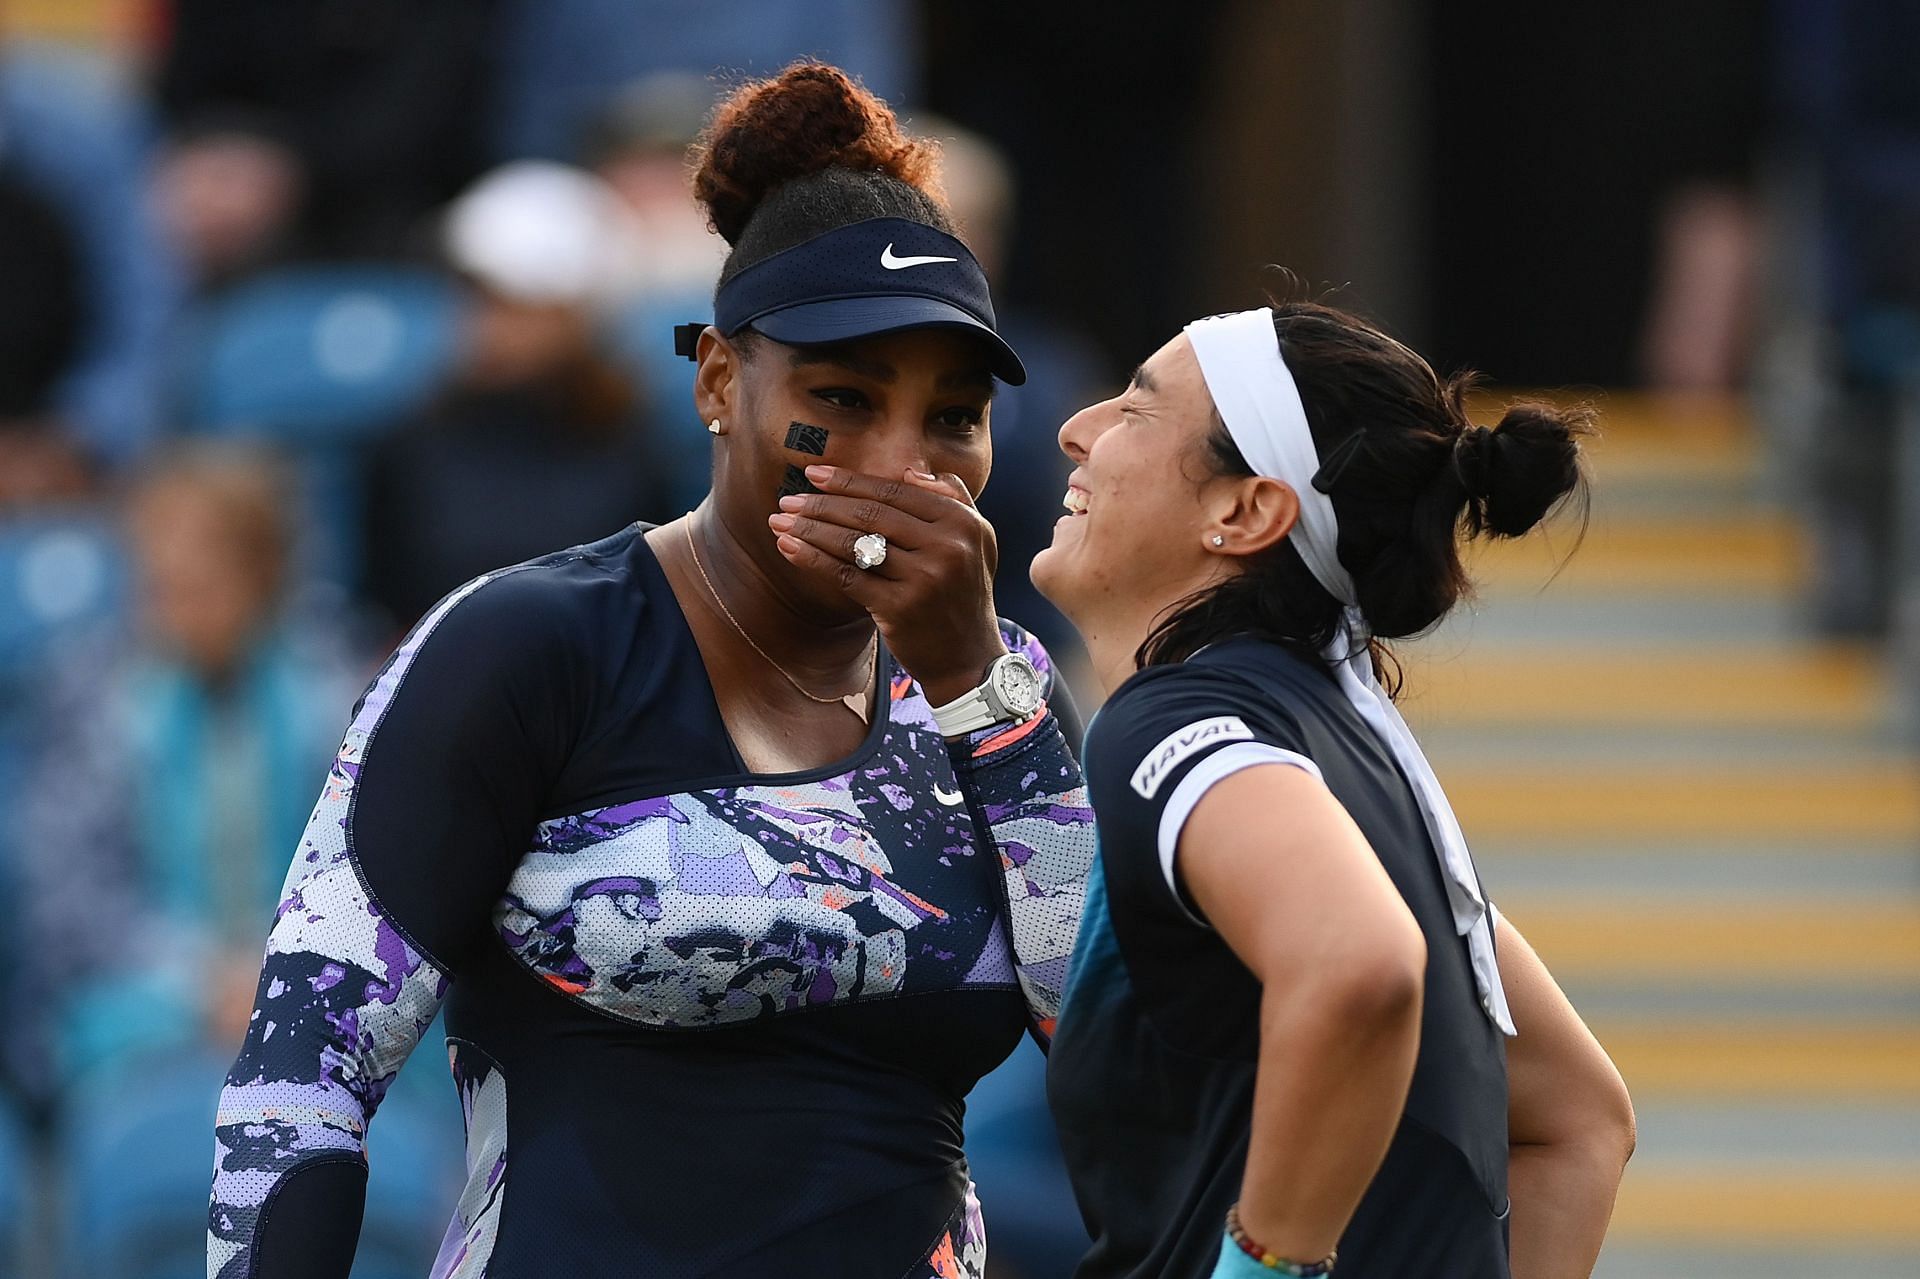 Williams and Jabeur share a light moment during the match